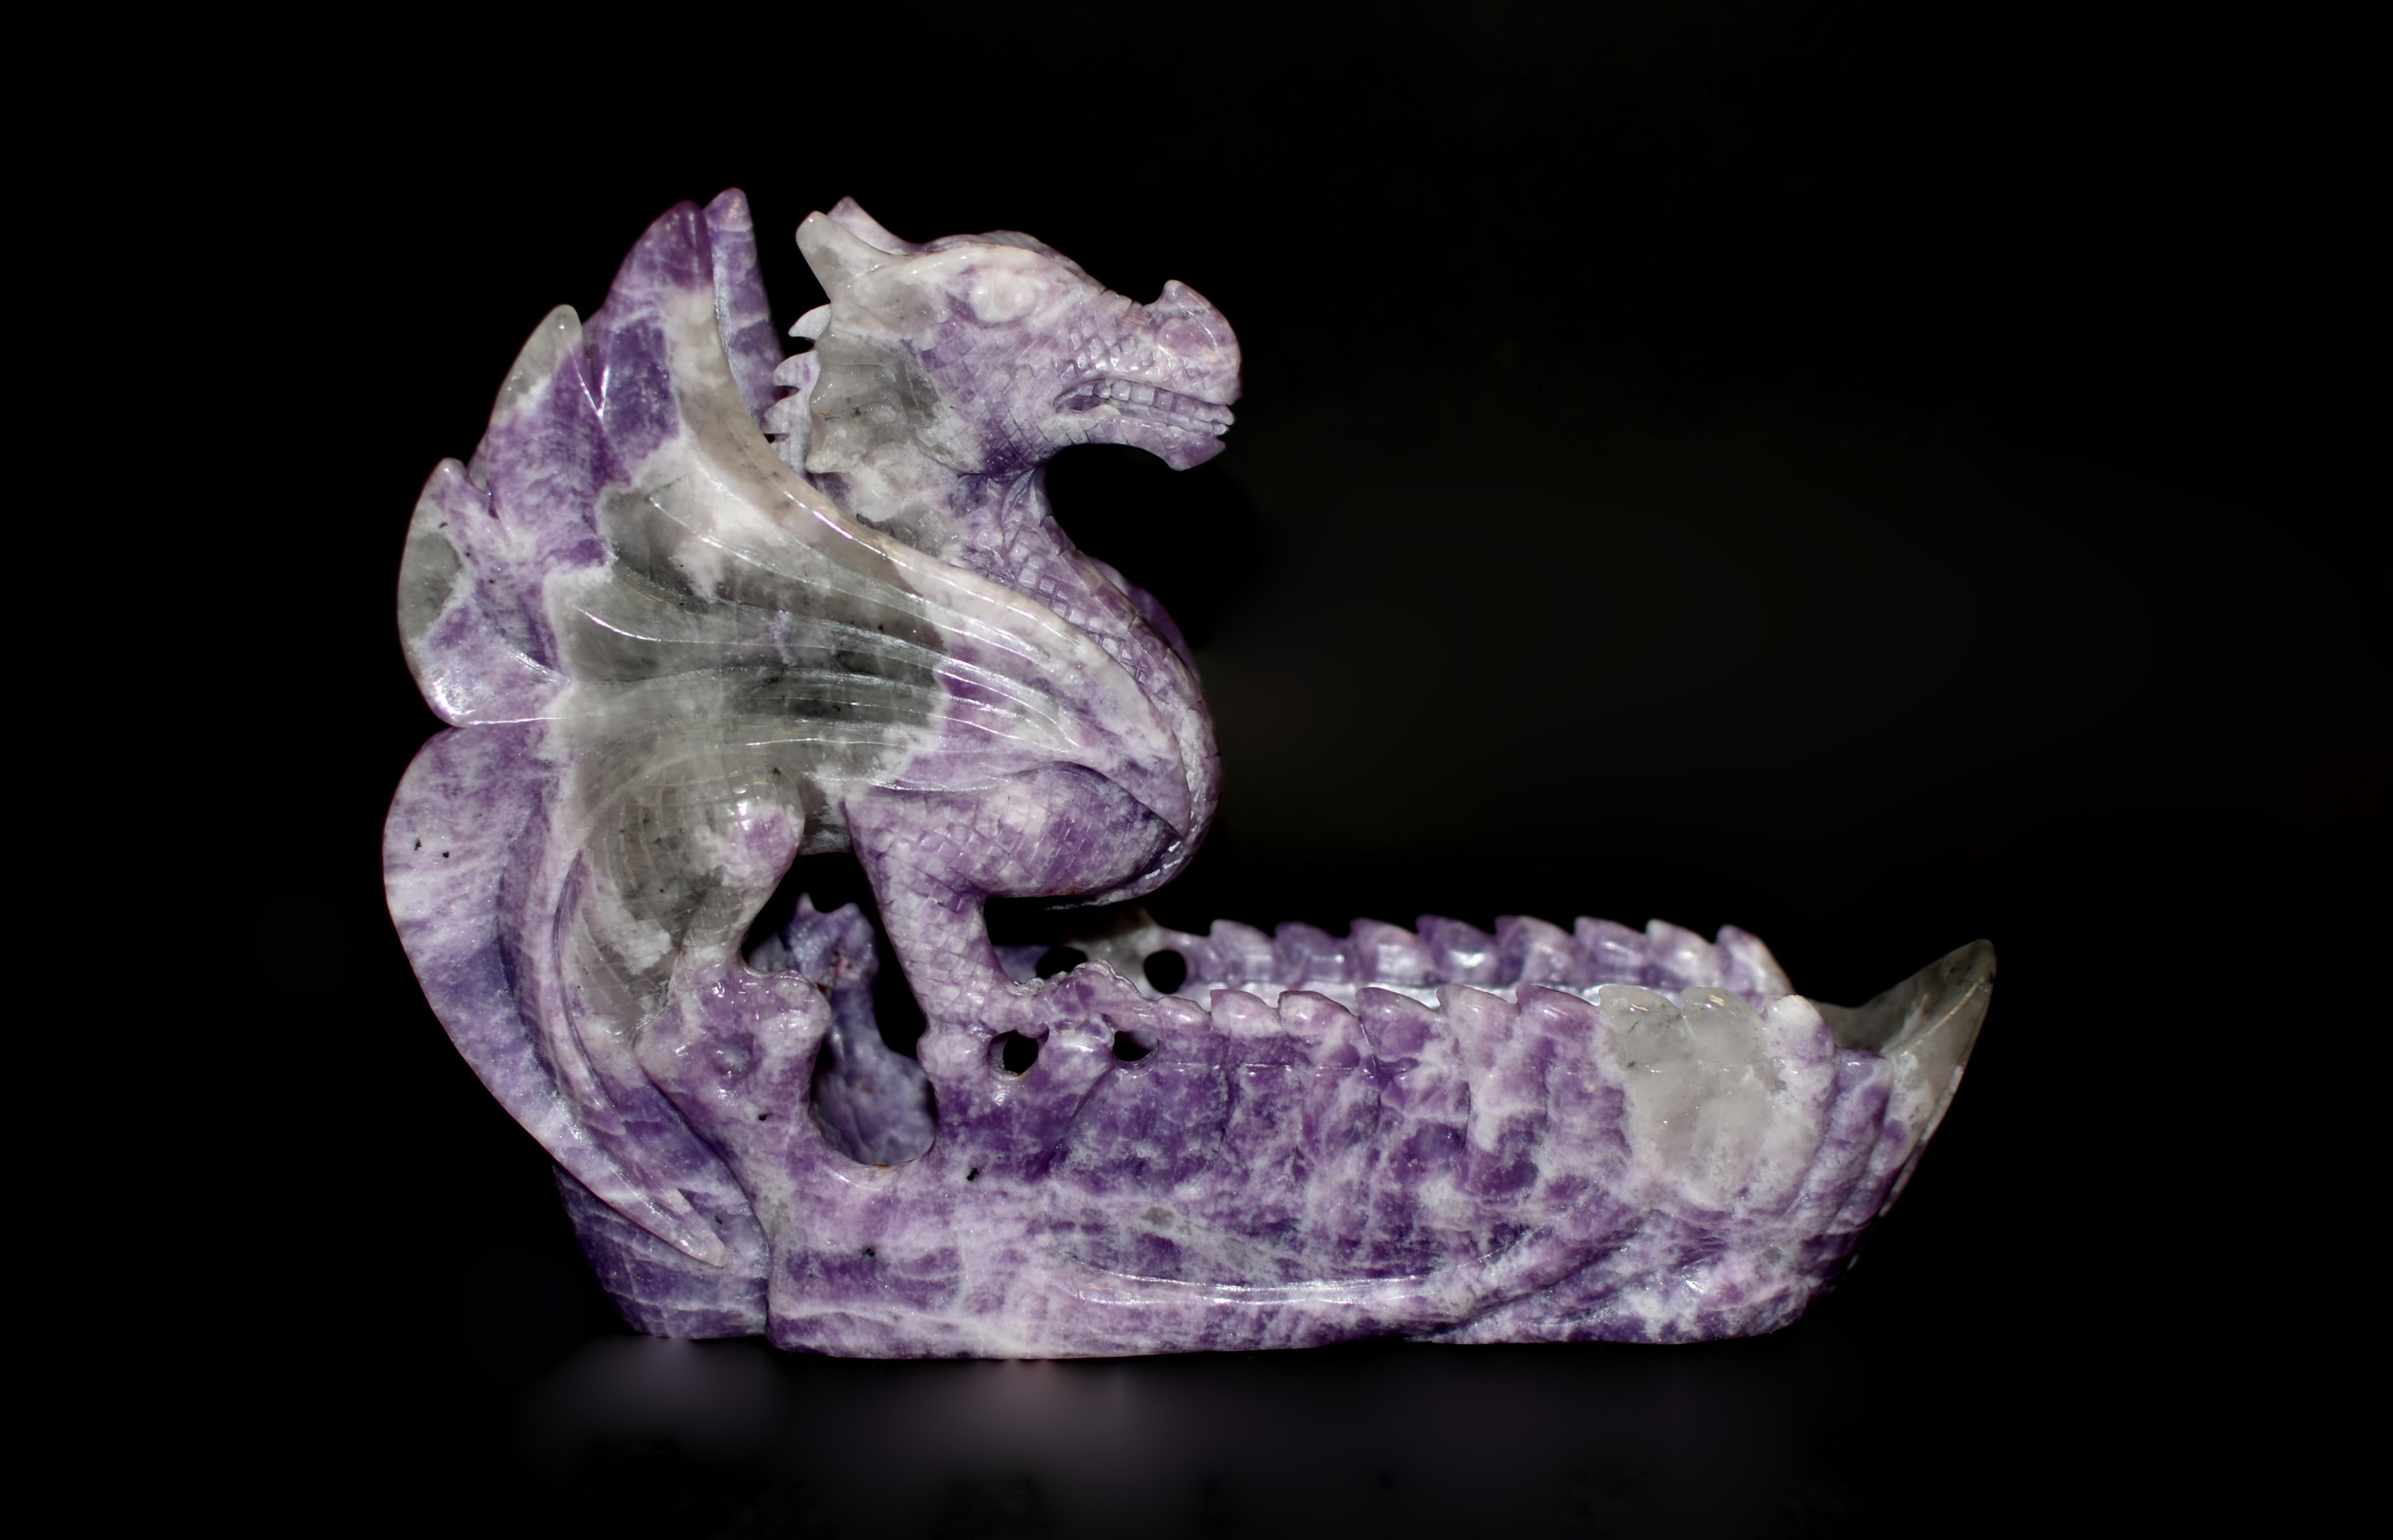 Crafted from 100% natural, finest grade lepidolite, this finely carved 3.4 lb sculpture captures the magnificence of the dragon via a beautiful rare mineral. With scales gleaming and bulging eyes that flicker, the dragon commands both fear and